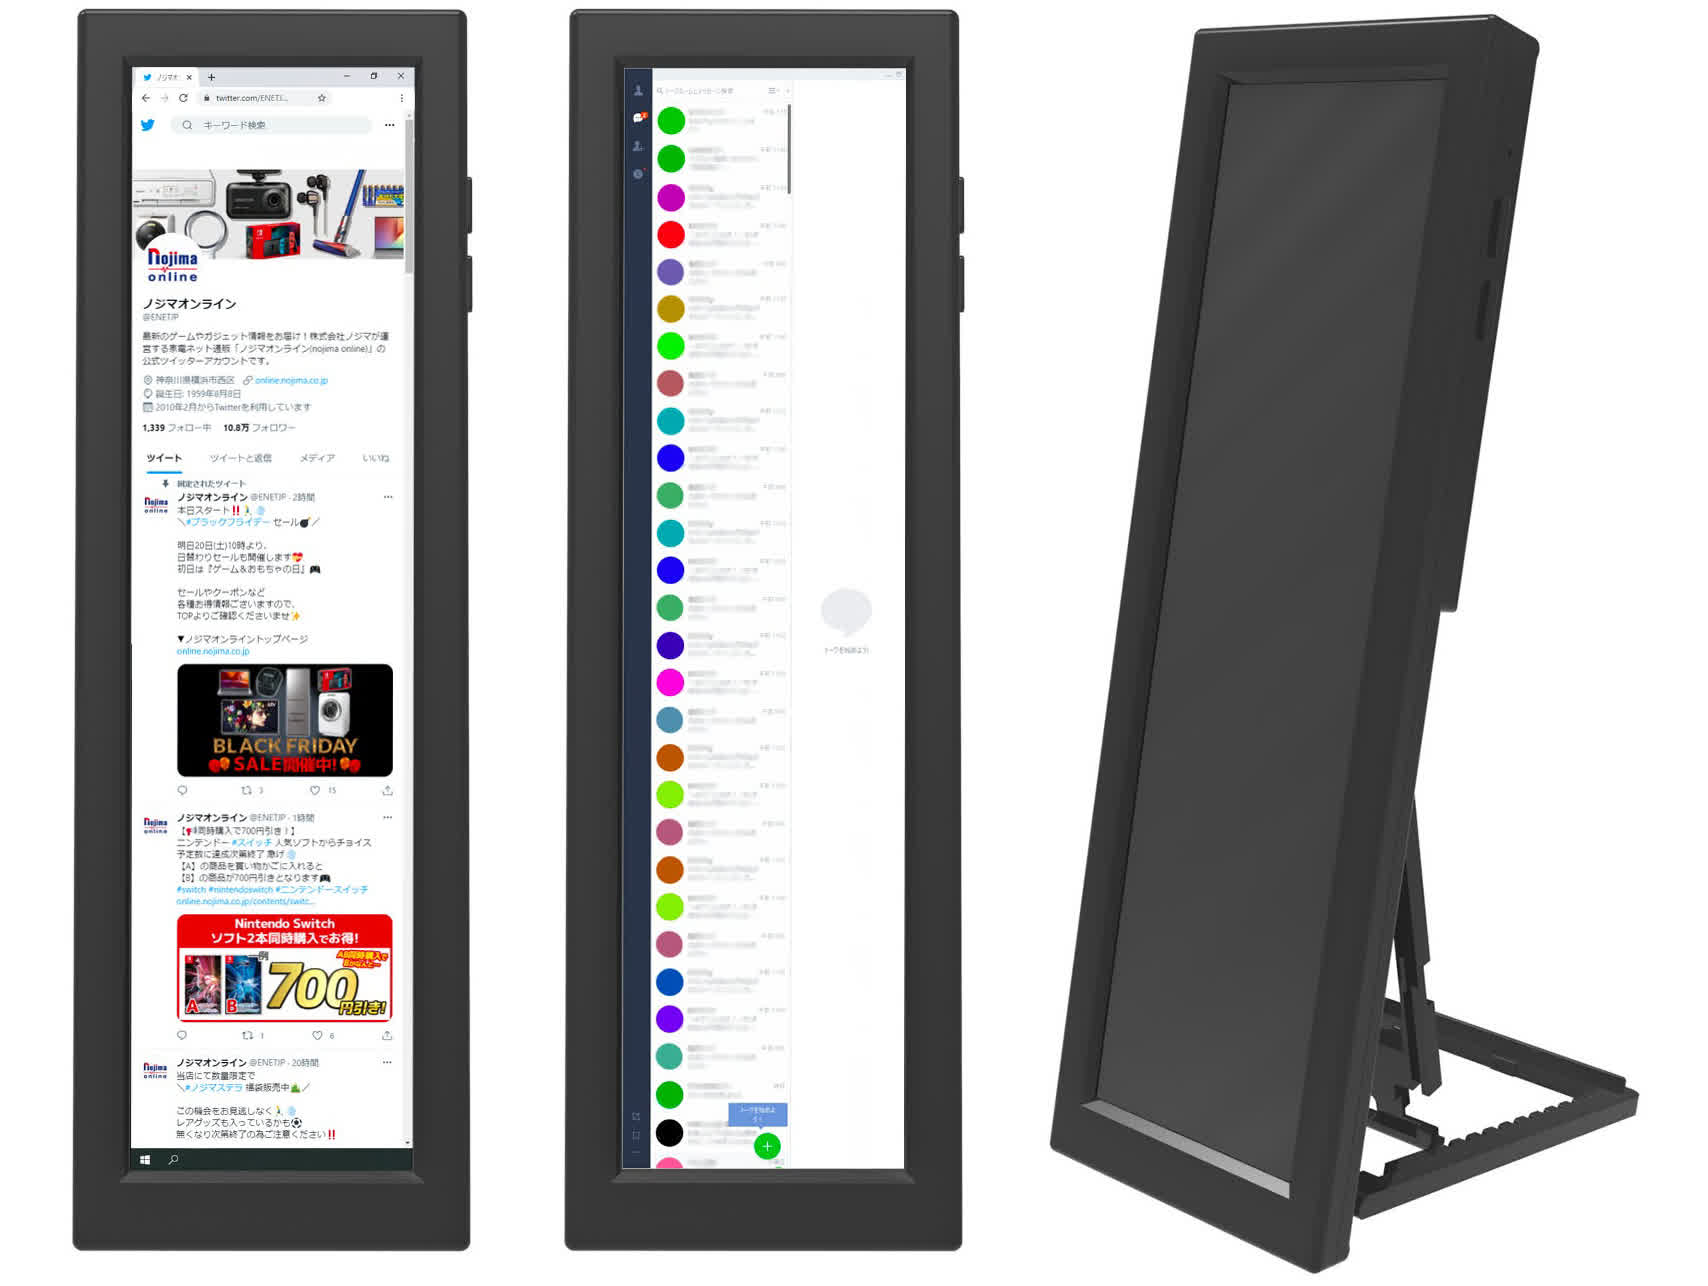 Elsonic's ultra-tall display is designed specifically for social media scrolling